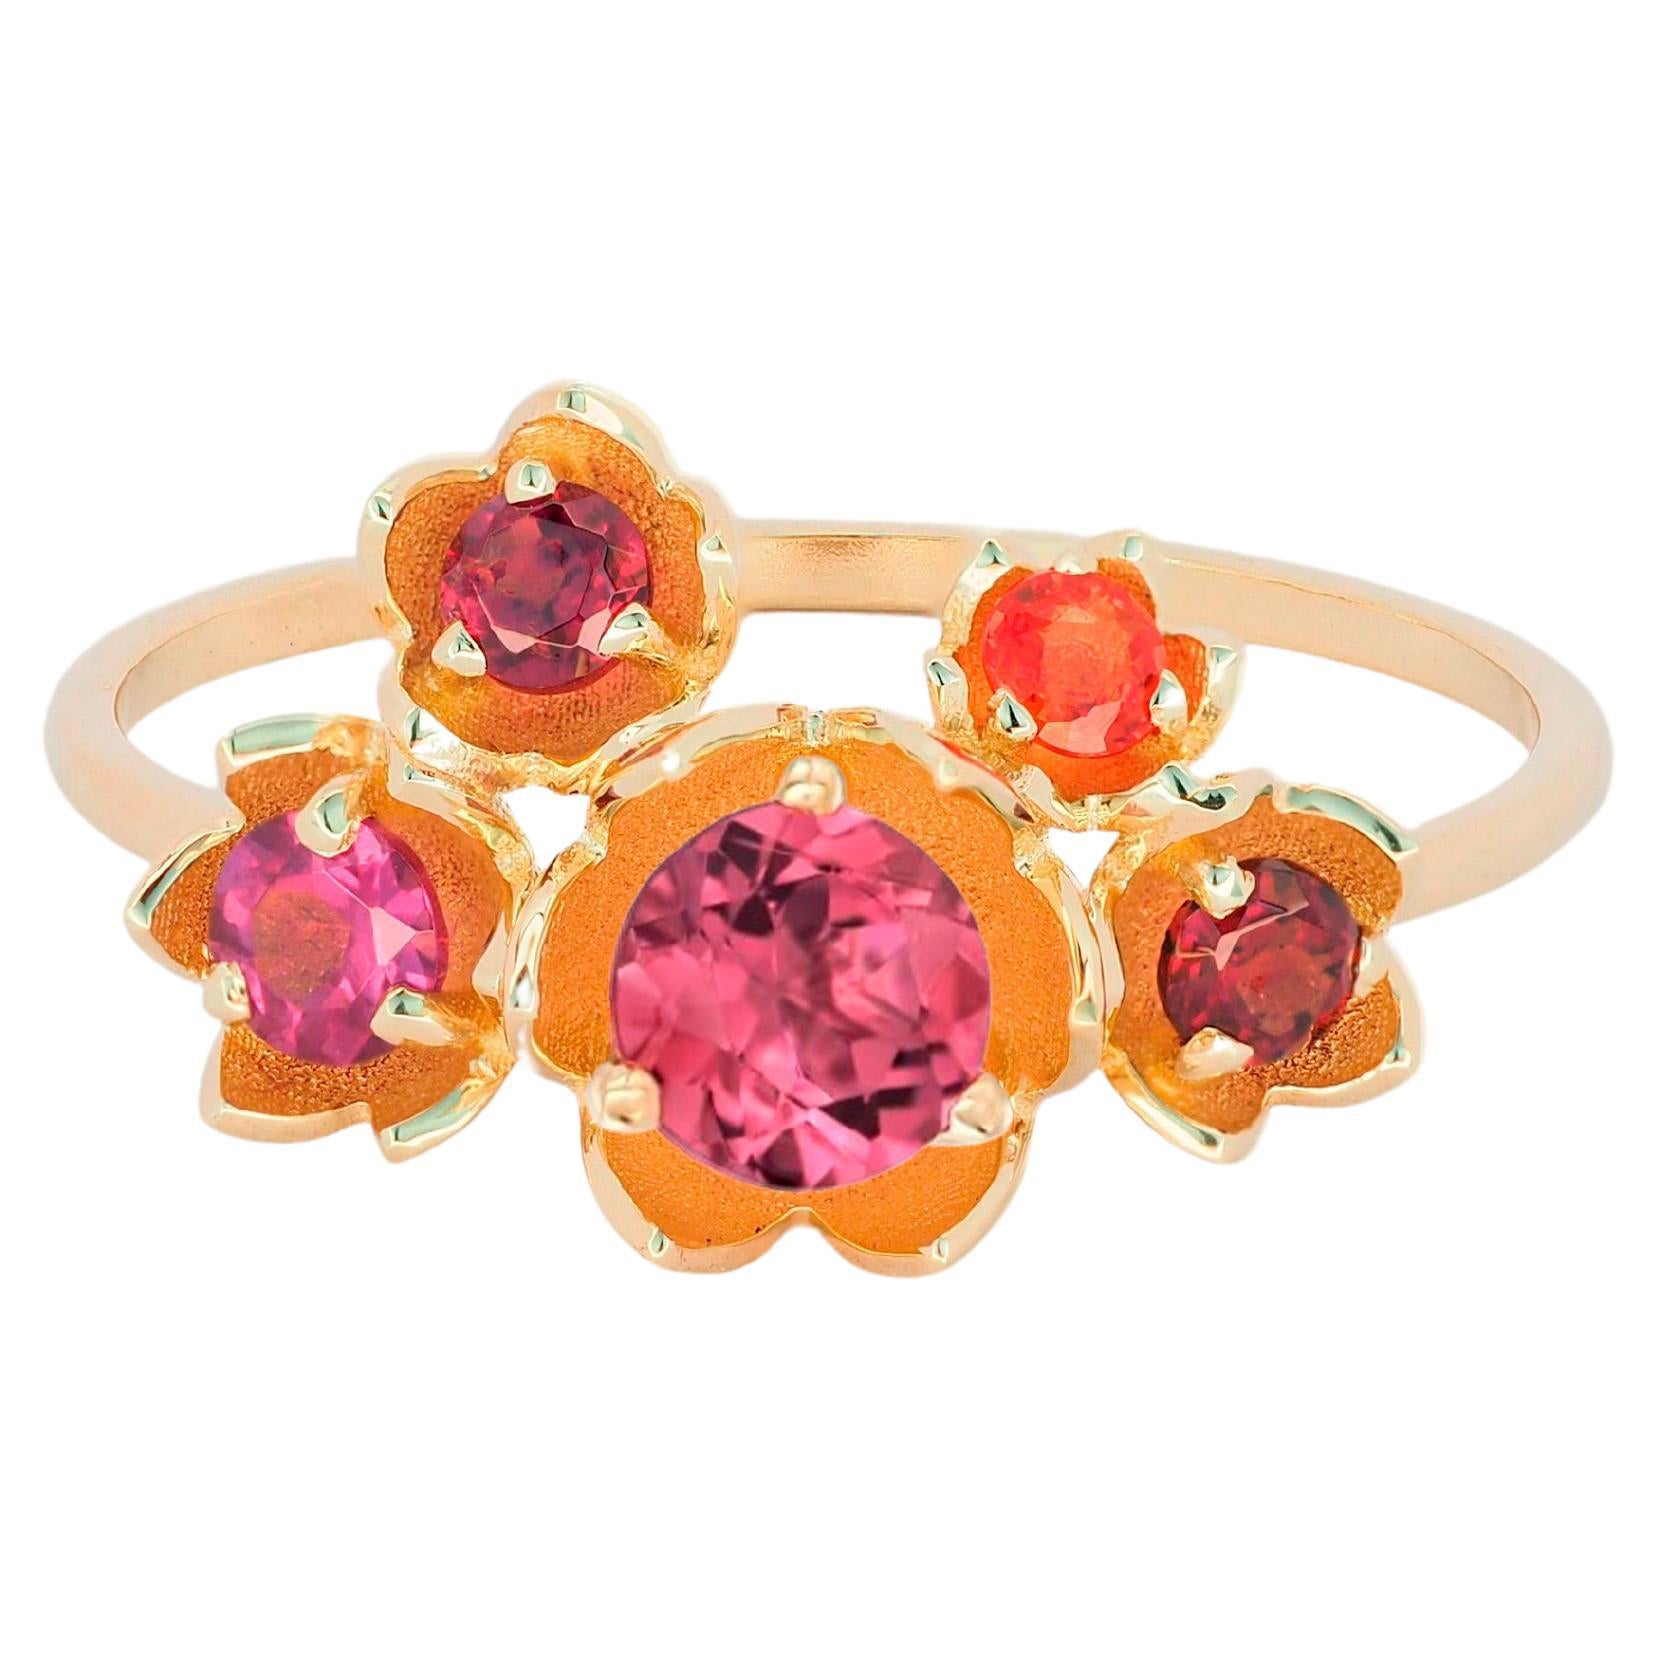 14 Karat Gold Blossom Ring with Multicolored Gemstones, Pink Tourmaline Ring